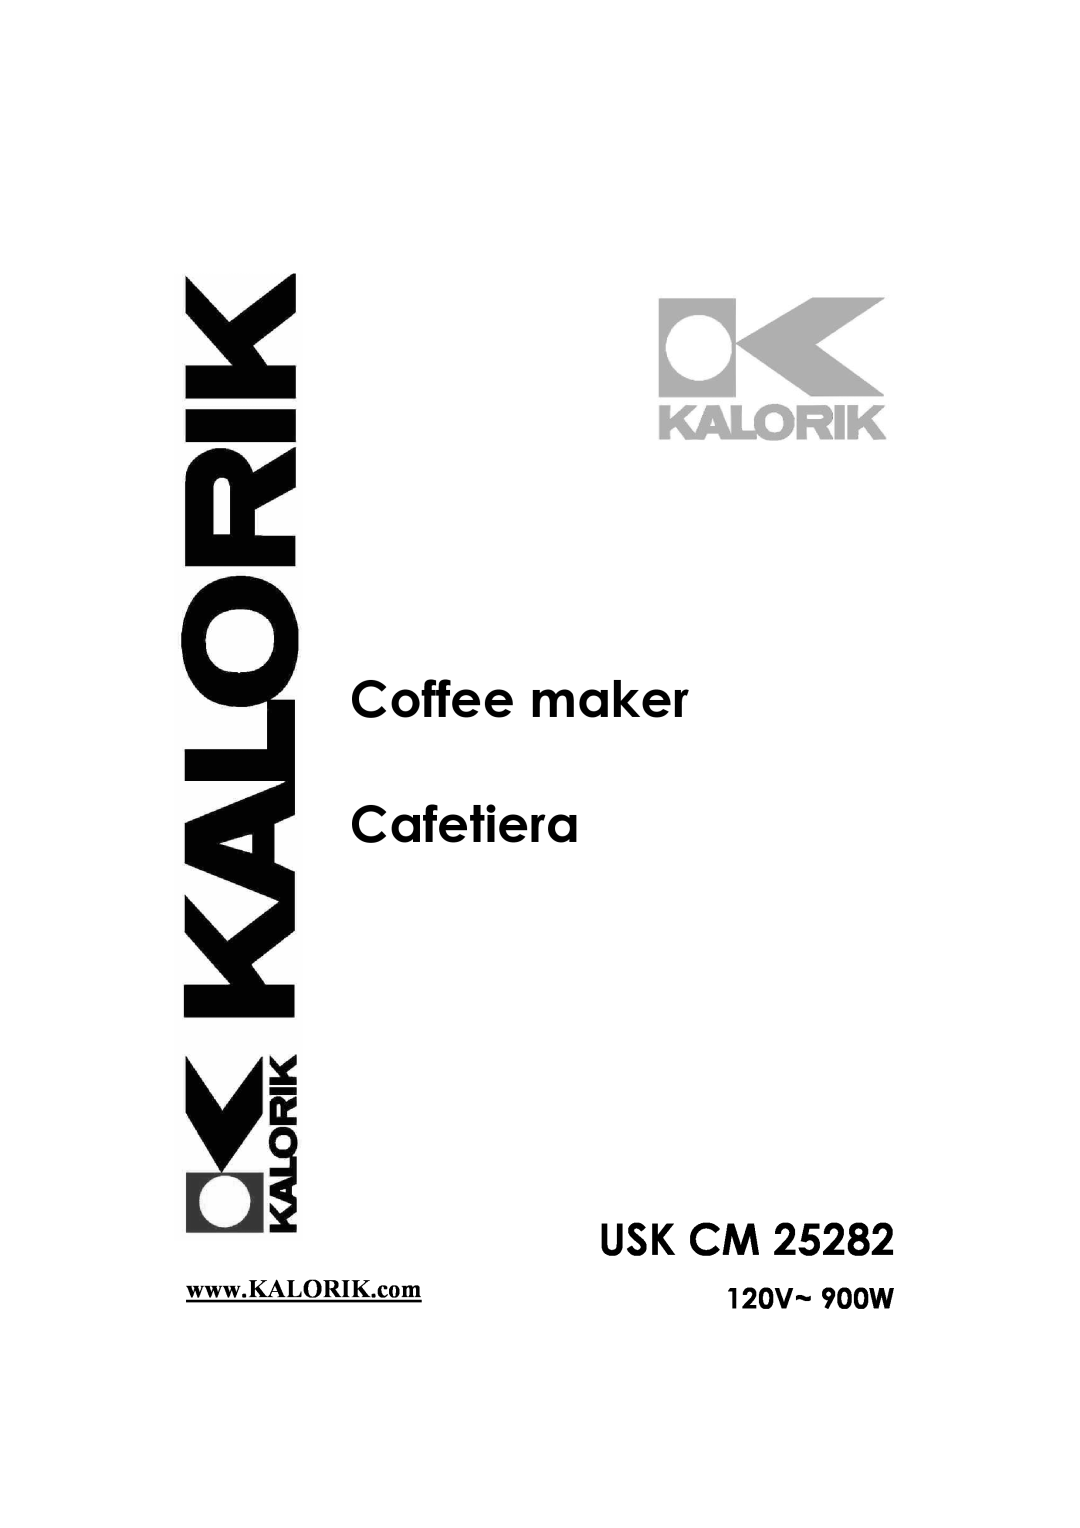 Kalorik USK CM 25282 manual 120V~ 900W, Coffee maker Cafetera, Usk Cm, Front cover page first page Assembly page 1/20 